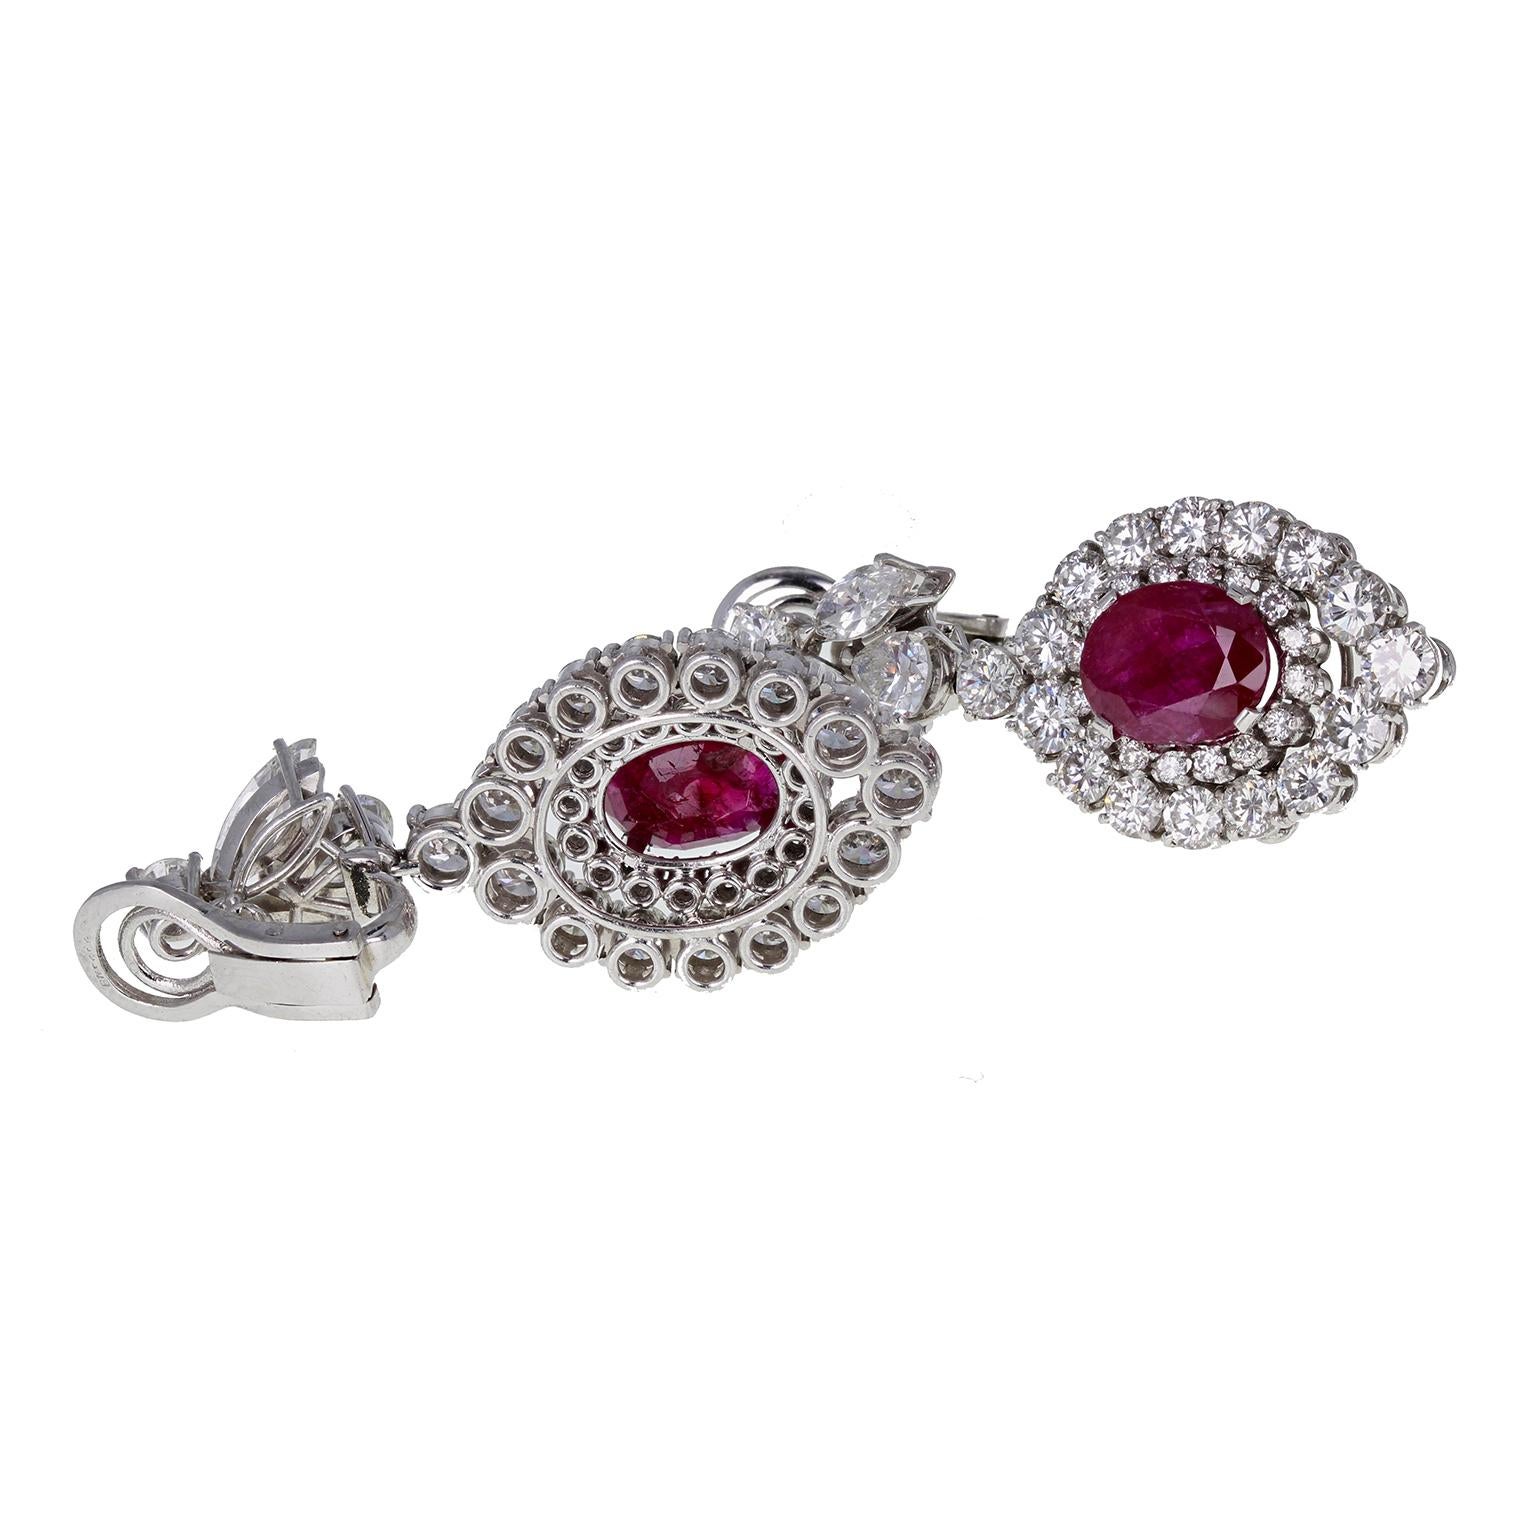 Two perfectly matched, untreated Burma rubies, each of approximately 3.40 carats, surrounded by a double row of brilliant-cut diamonds, suspended from a cluster of marquise-cut diamonds. Clip fittings for unpierced ears. Please view the video to